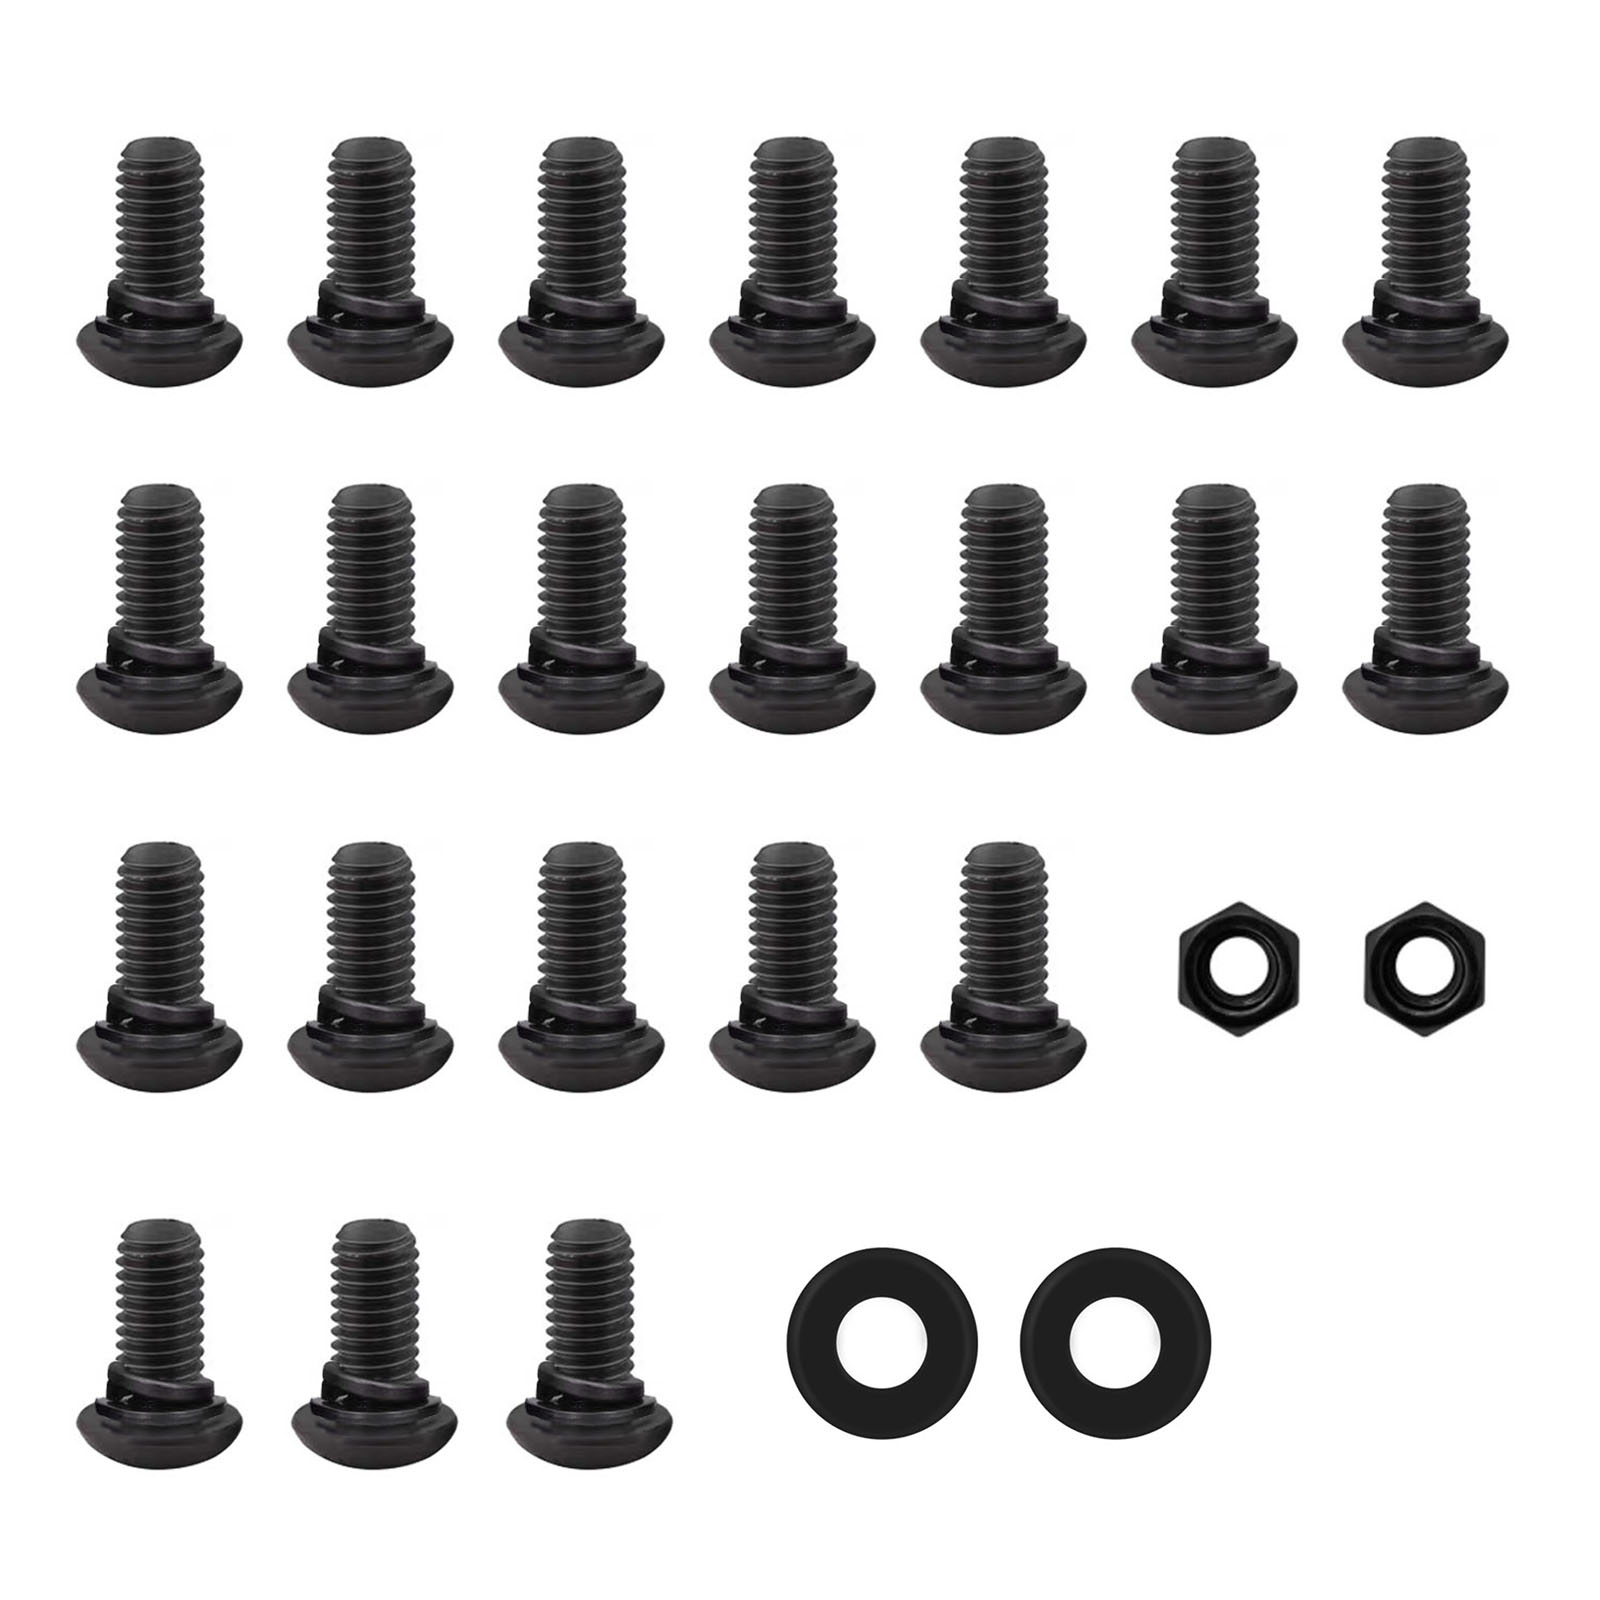 Universal Mounting Hardware Pack for Pit Boss PB700FB Grill -YAOAWE